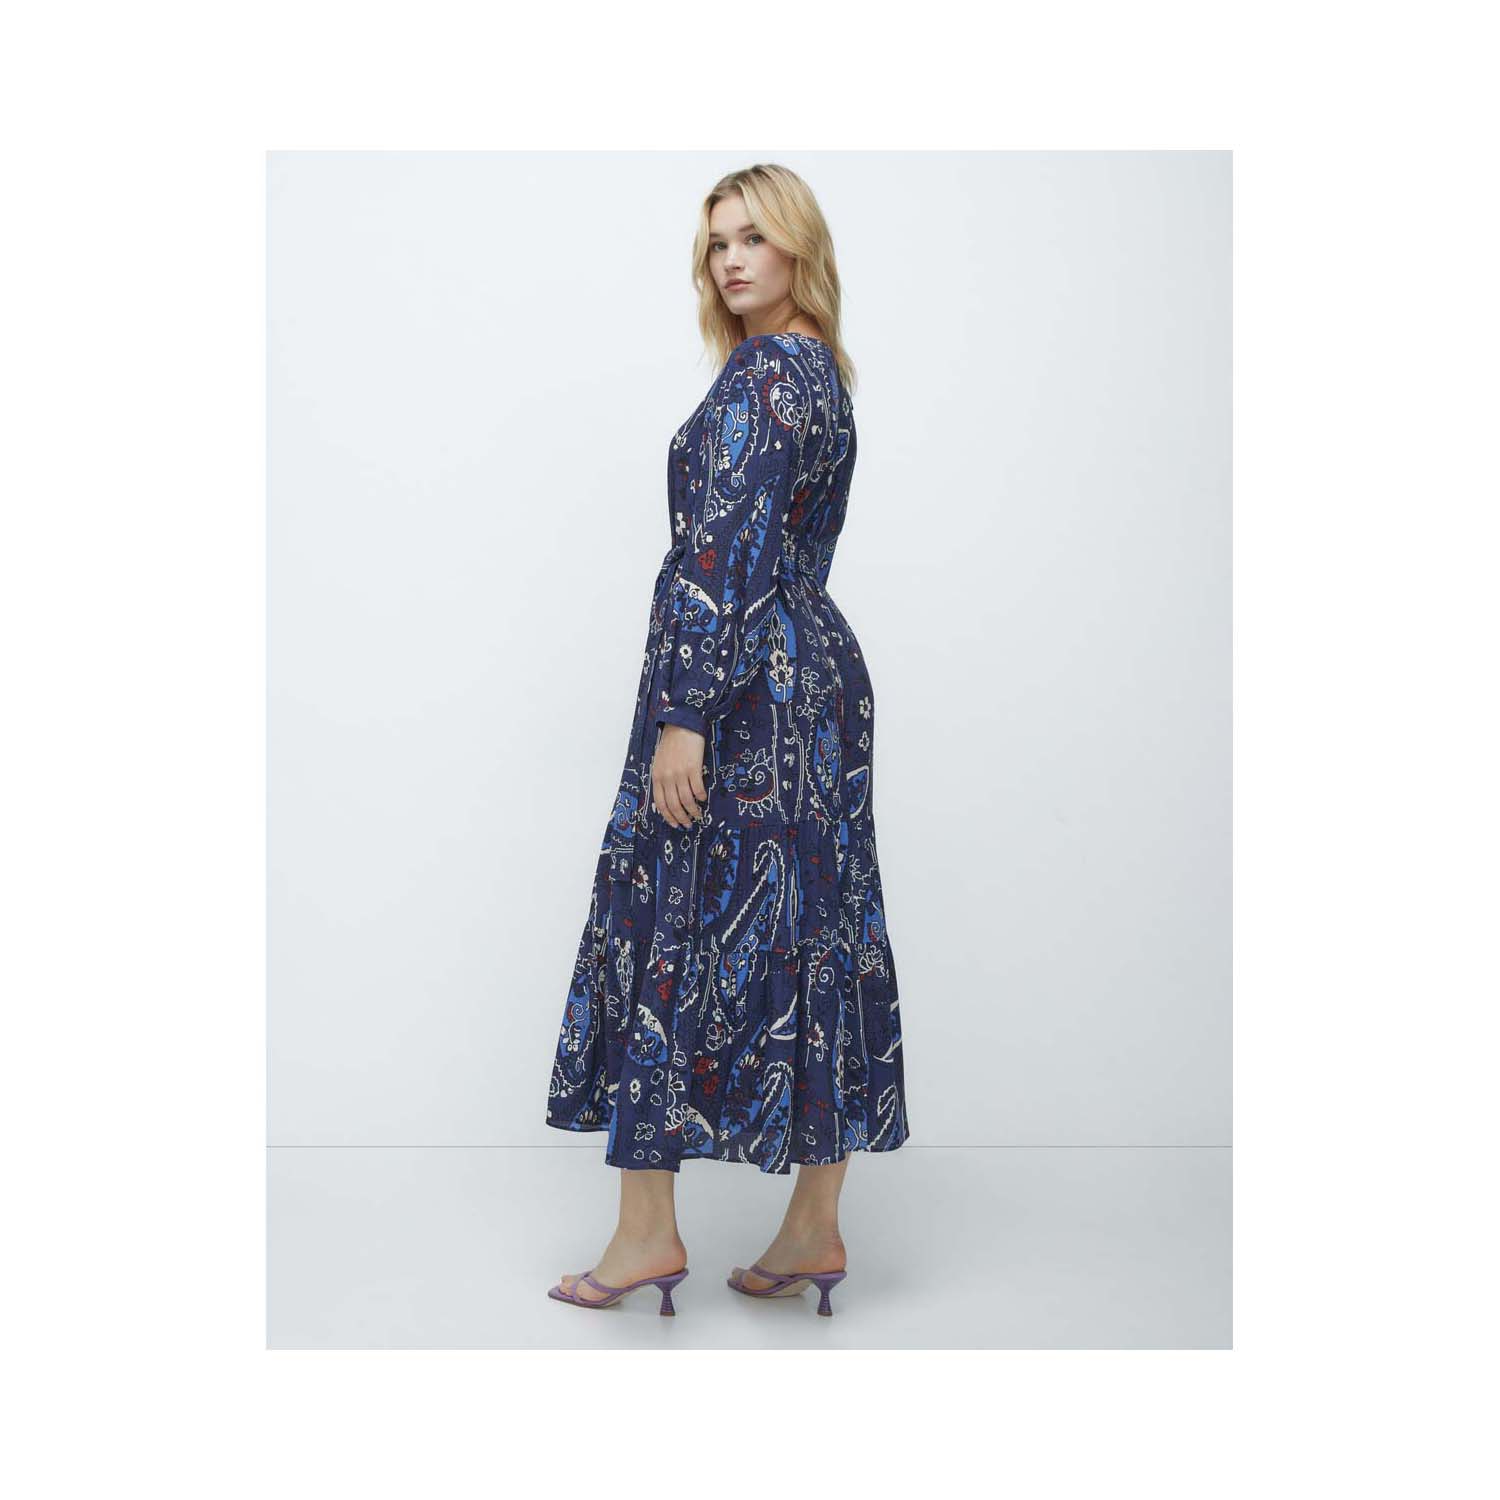 Couchel Long-Sleeved Floral Dress - Multi 2 Shaws Department Stores